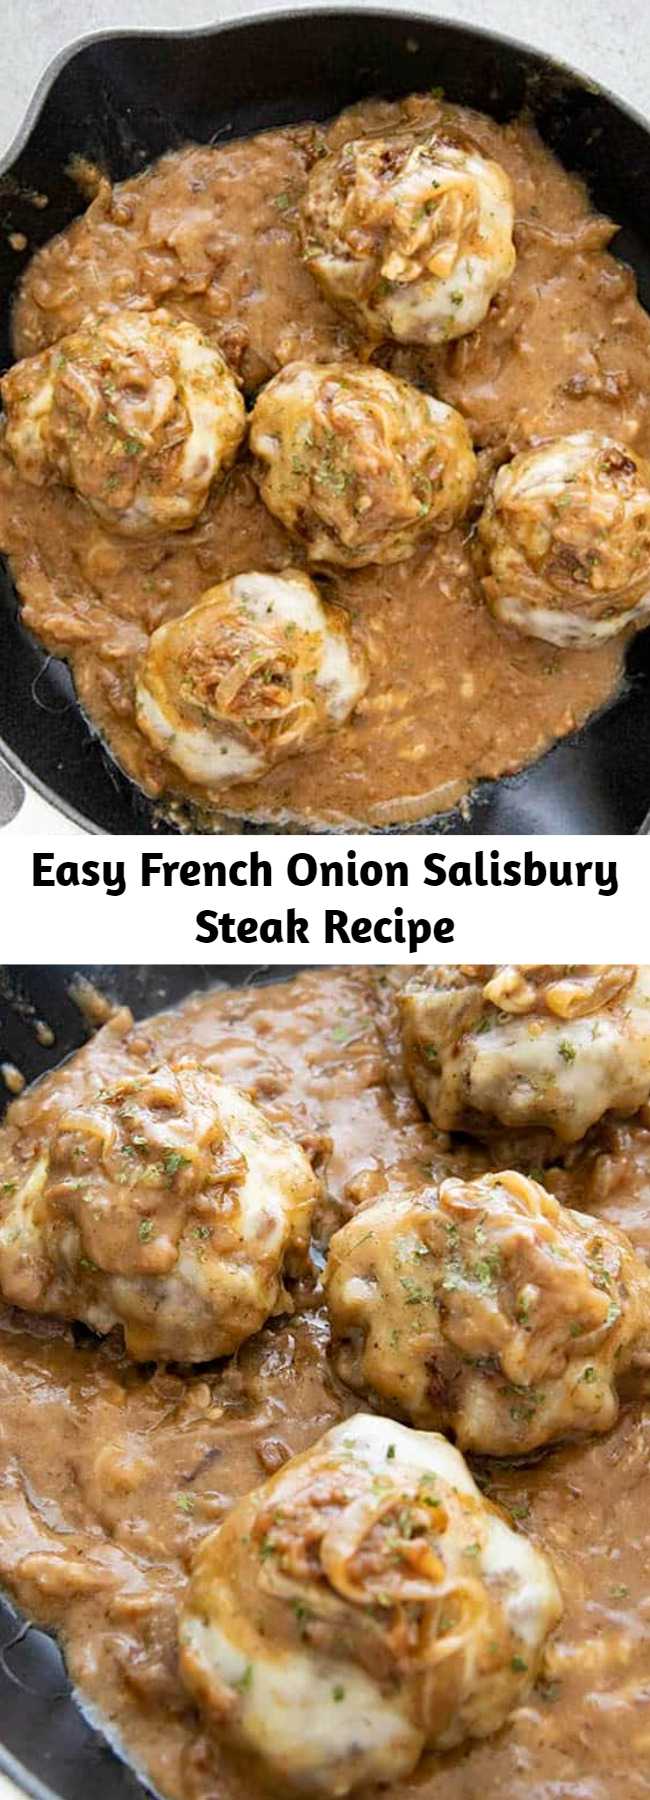 Easy French Onion Salisbury Steak Recipe - French Onion Salisbury Steak is a delicious take on a classic dinner recipe!  This comfort food is so easy to make and has the most amazing savory gravy!